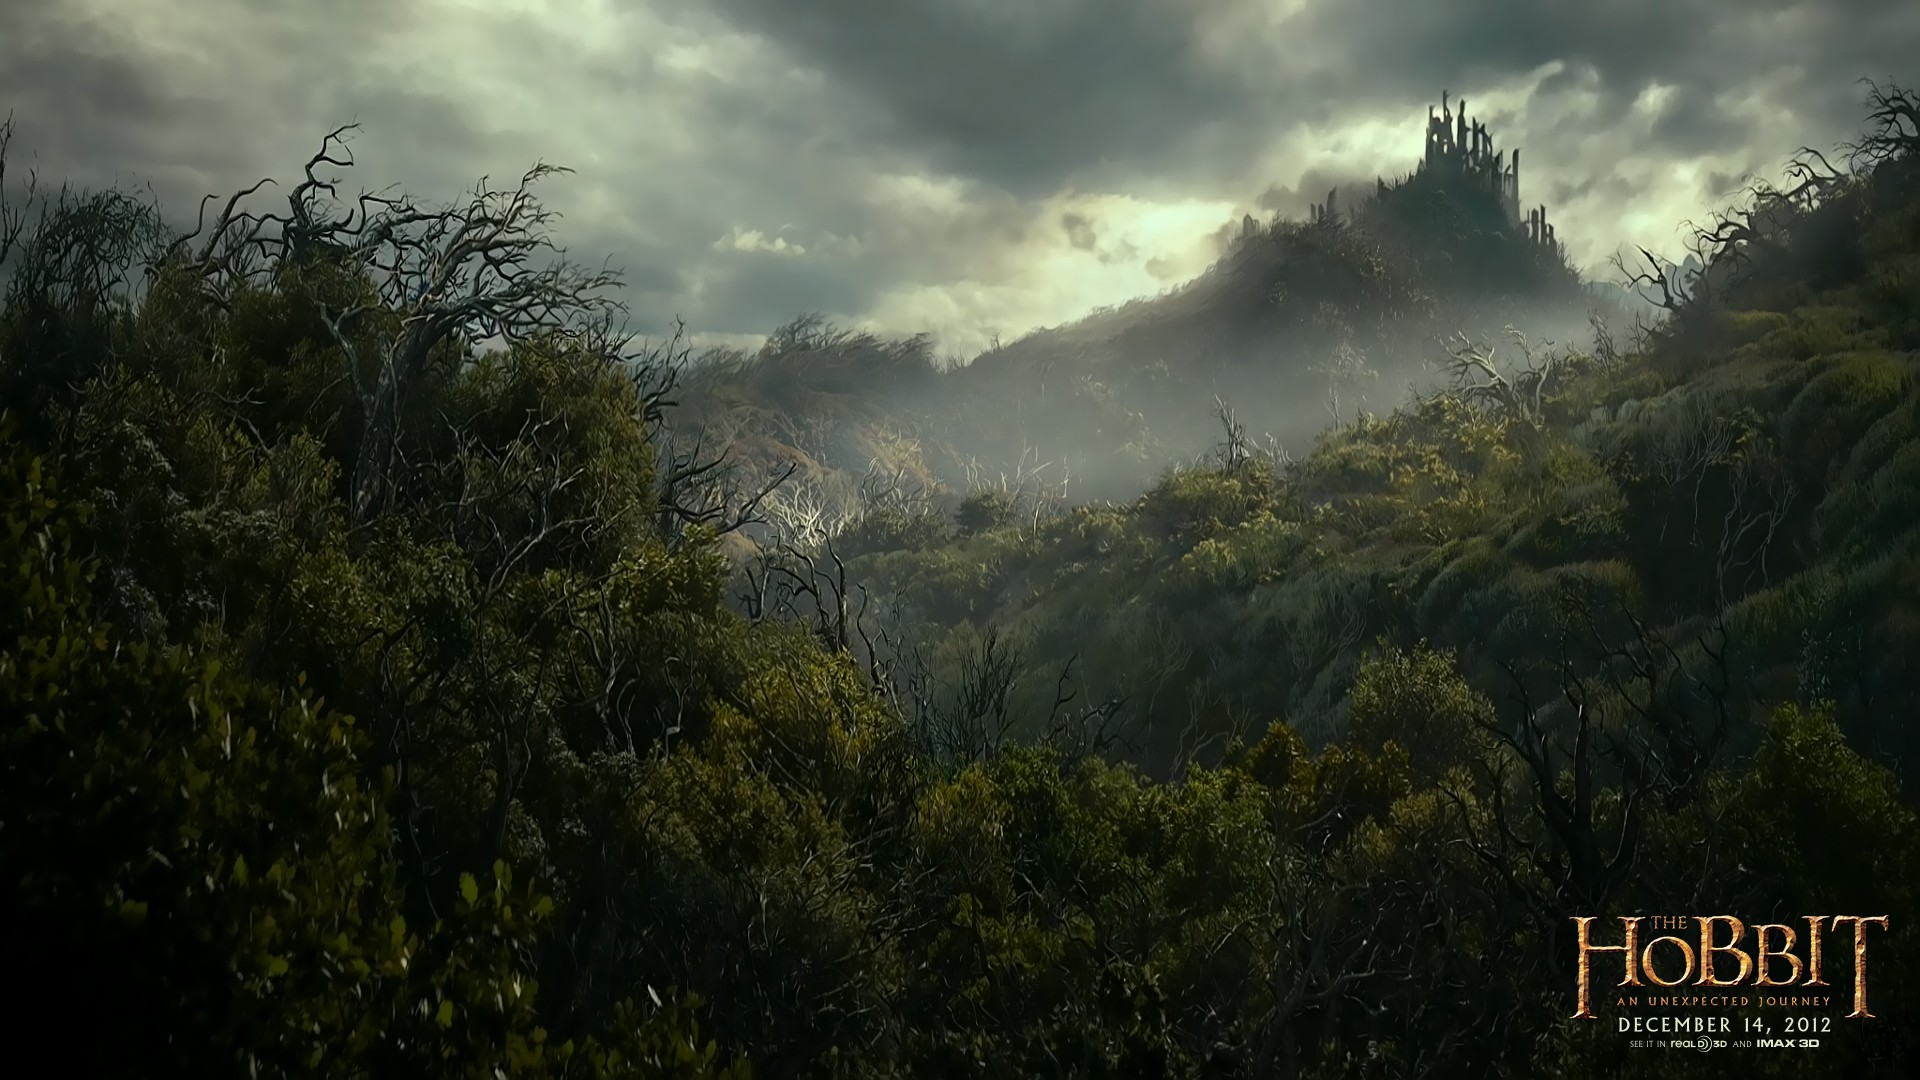 General 1920x1080 The Hobbit movies 2012 (Year) Peter Jackson landscape